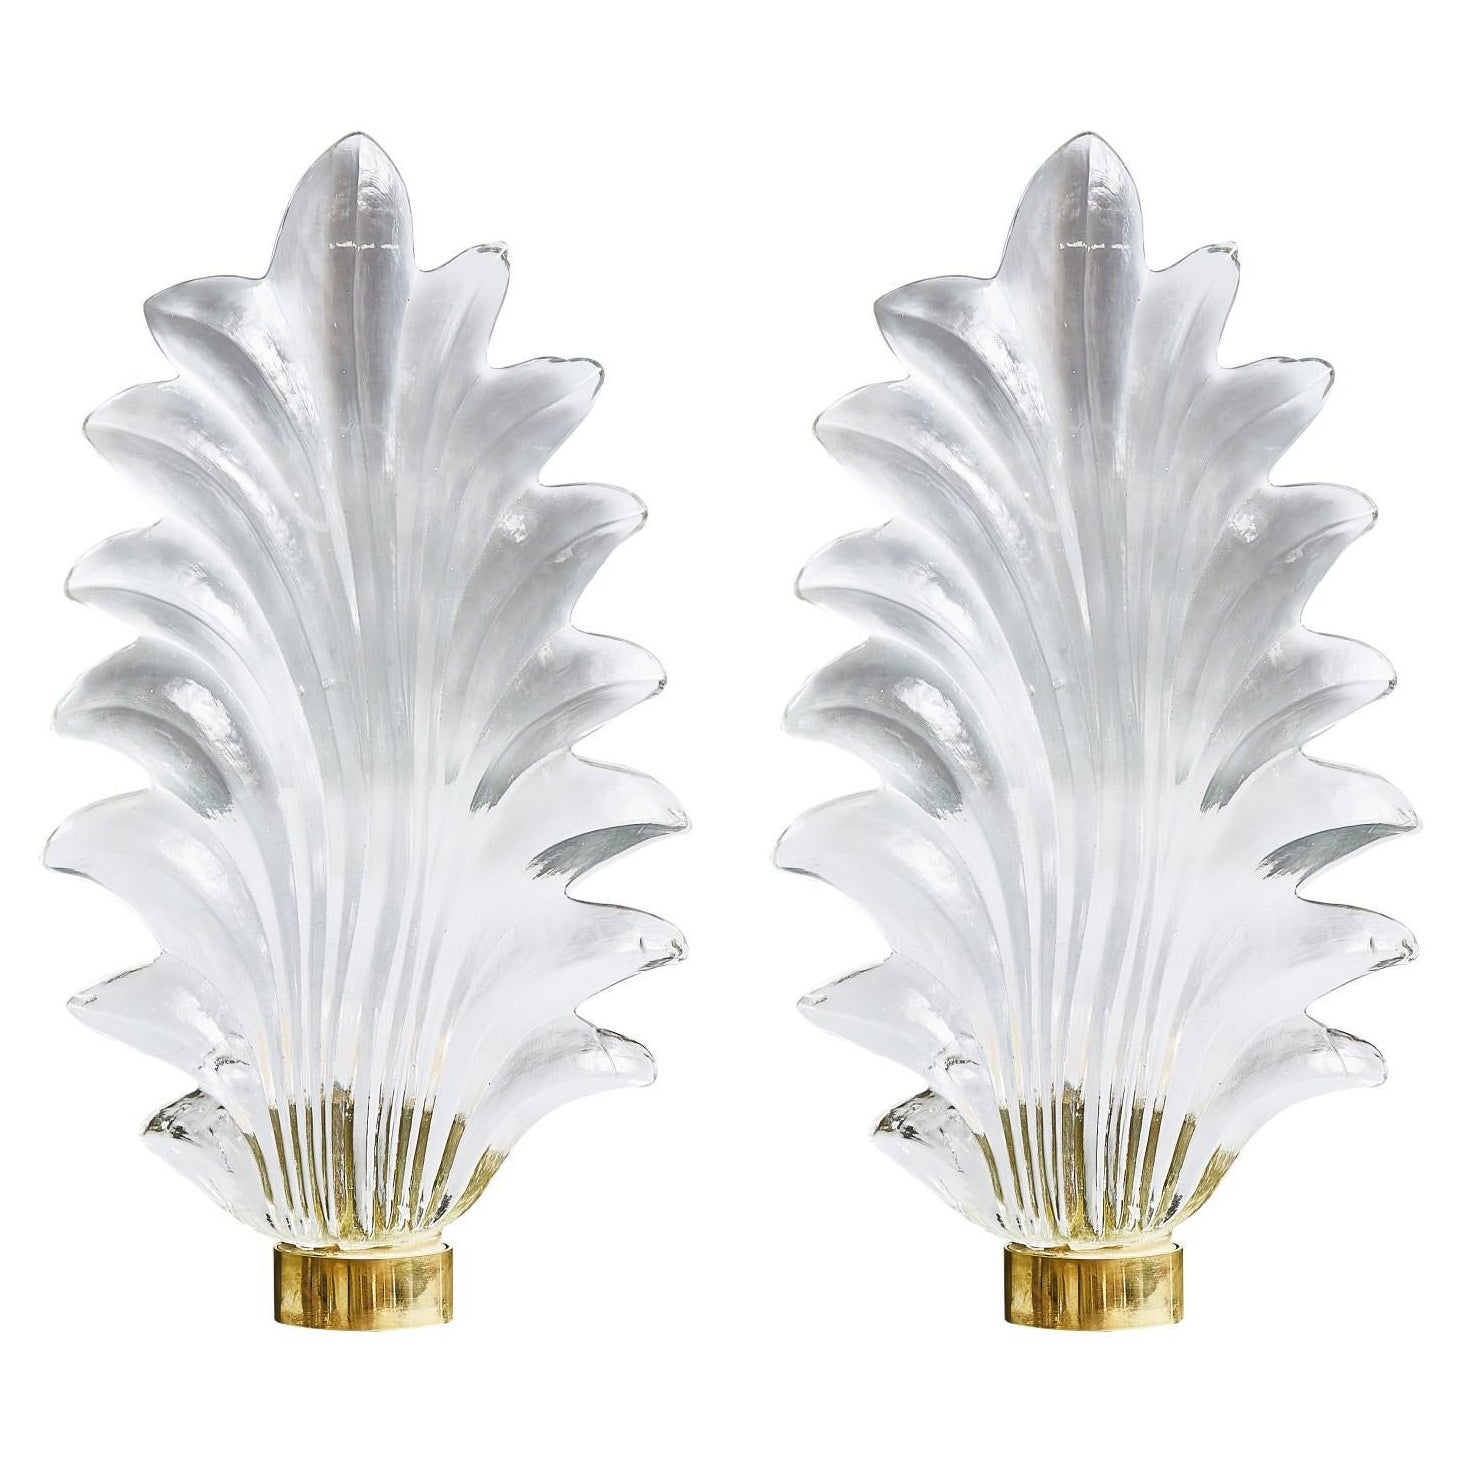 Pair of "Leaf" Sconces in Murano Glass by Studio Glustin For Sale